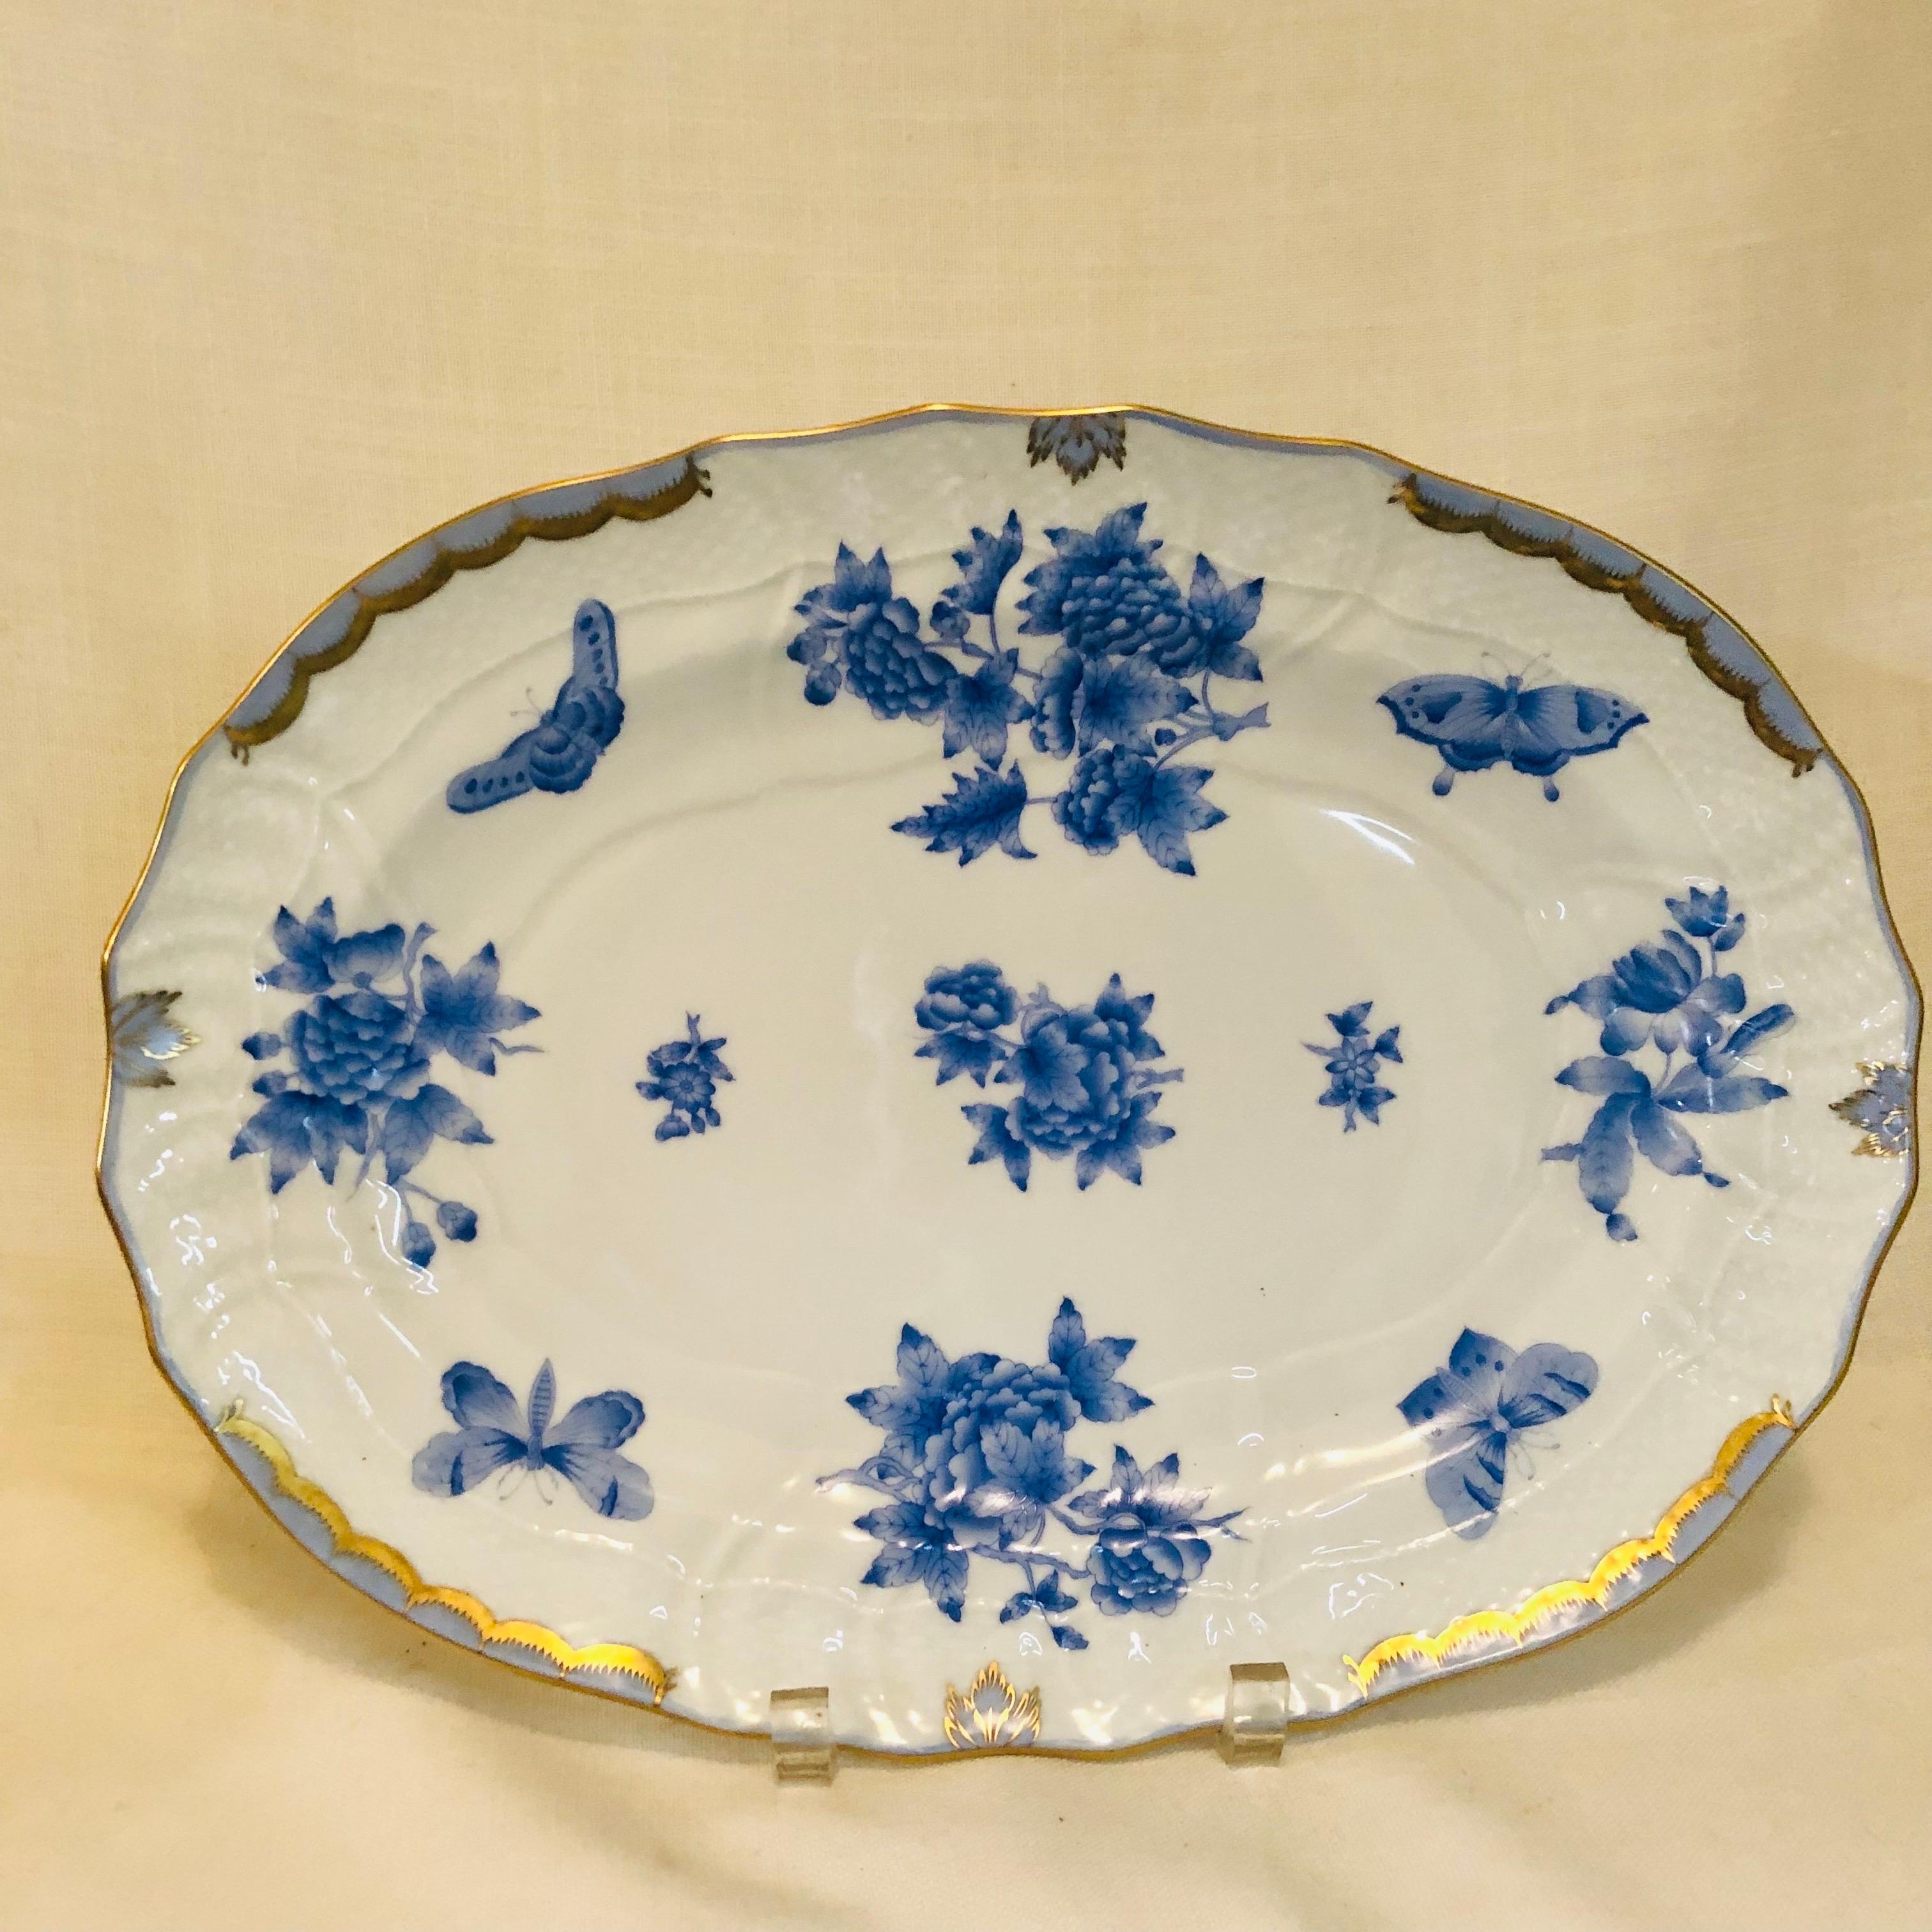 Hand-Painted Herend Fortuna Oval Platter Painted with Blue Butterflies and Flowers